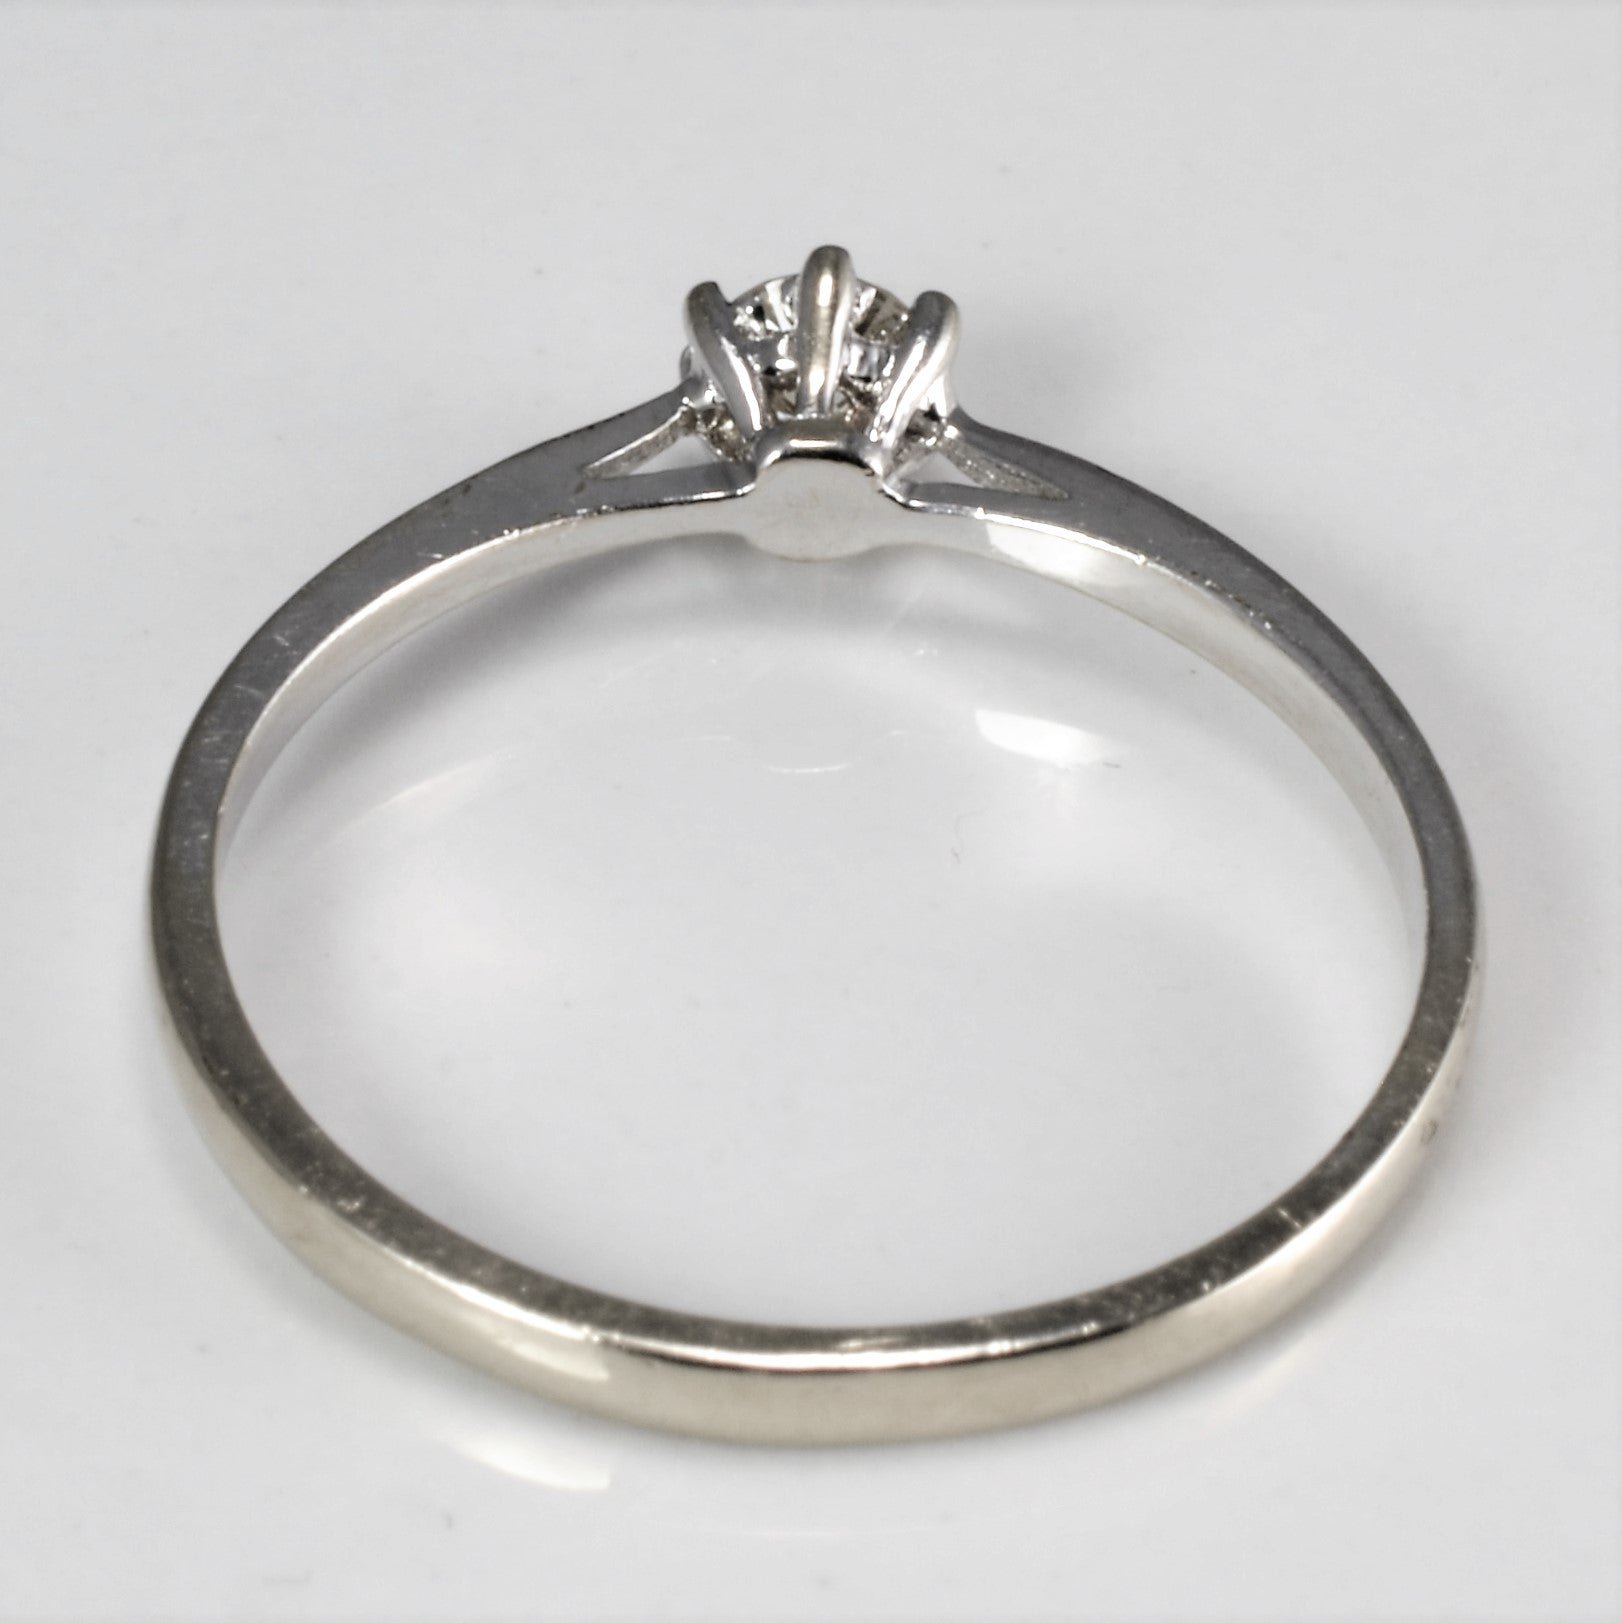 Six Prong Solitaire Diamond Ring | 0.12 ct, SZ 6.25 |